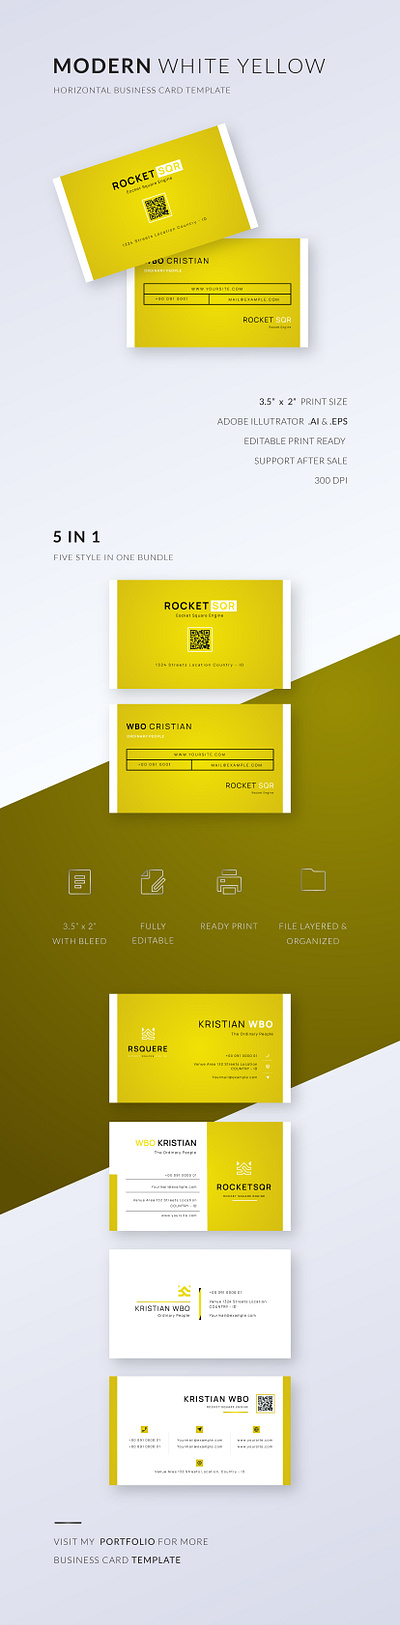 MODERN WHITE YELLOW BUSINESS CARD TEMPLATE black branding business business card card clean design creative editable energic horizontal icon logo modern professional qr code simple vector visit card white yellow